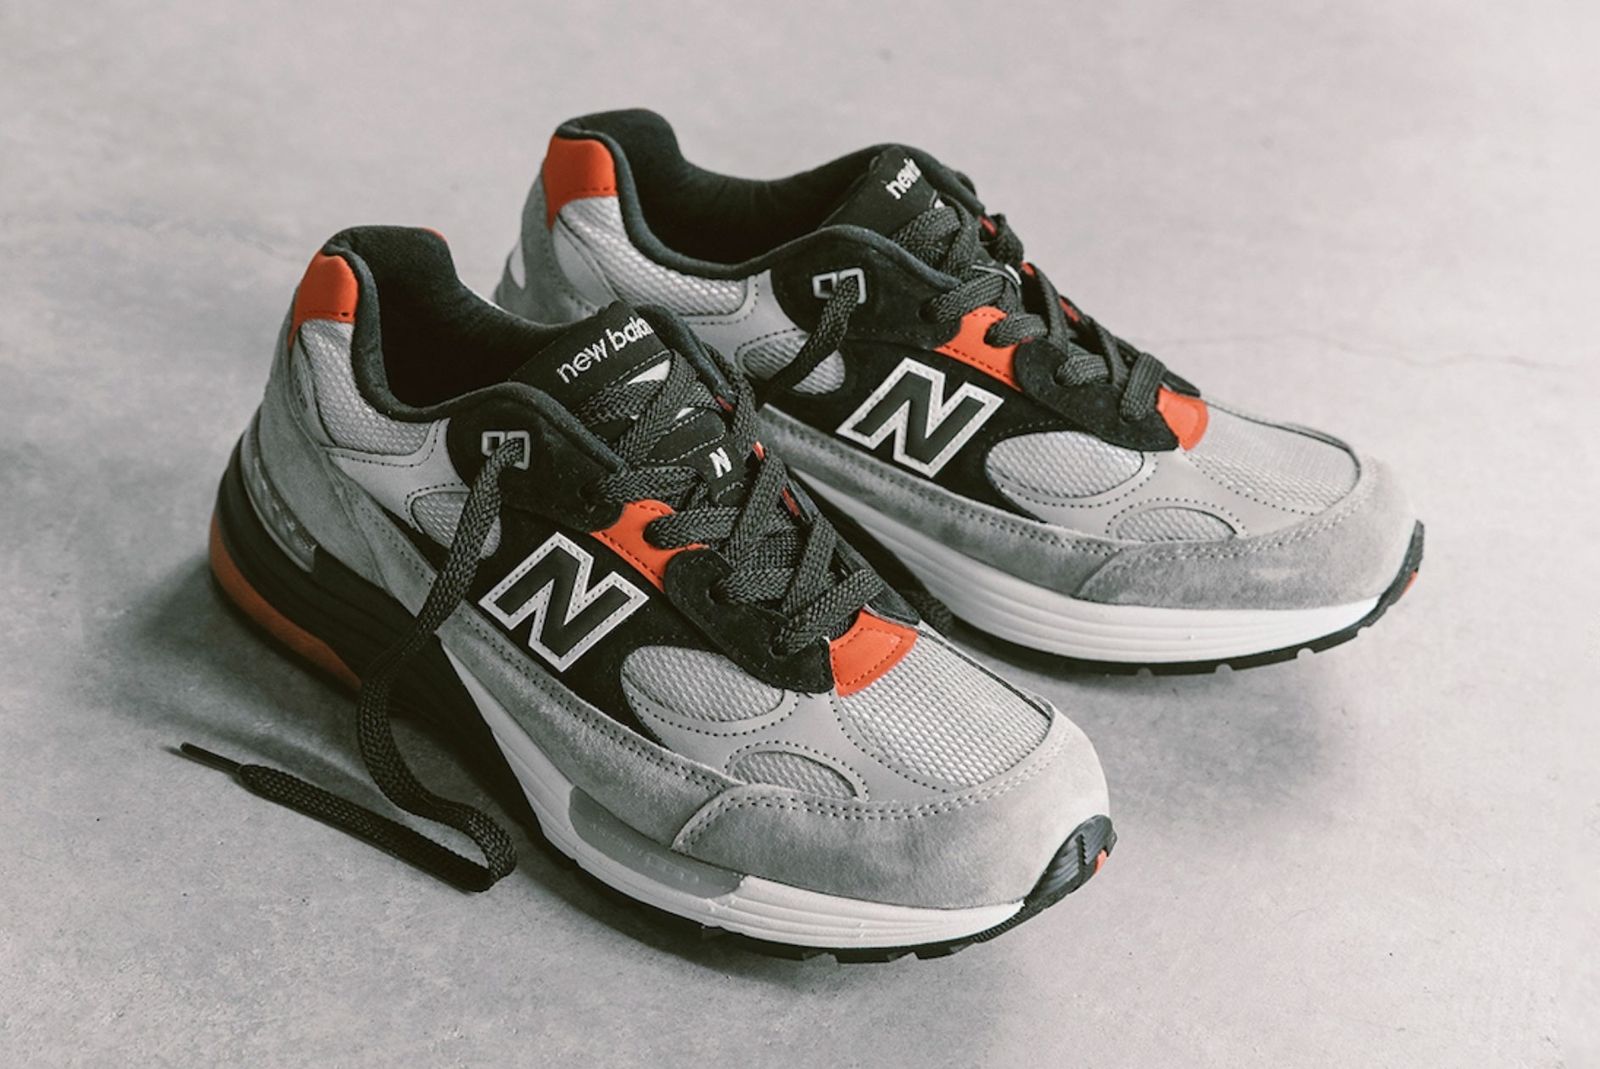 DTLR Celebrate Washington DC with this New Balance 992 - Sneaker Freaker